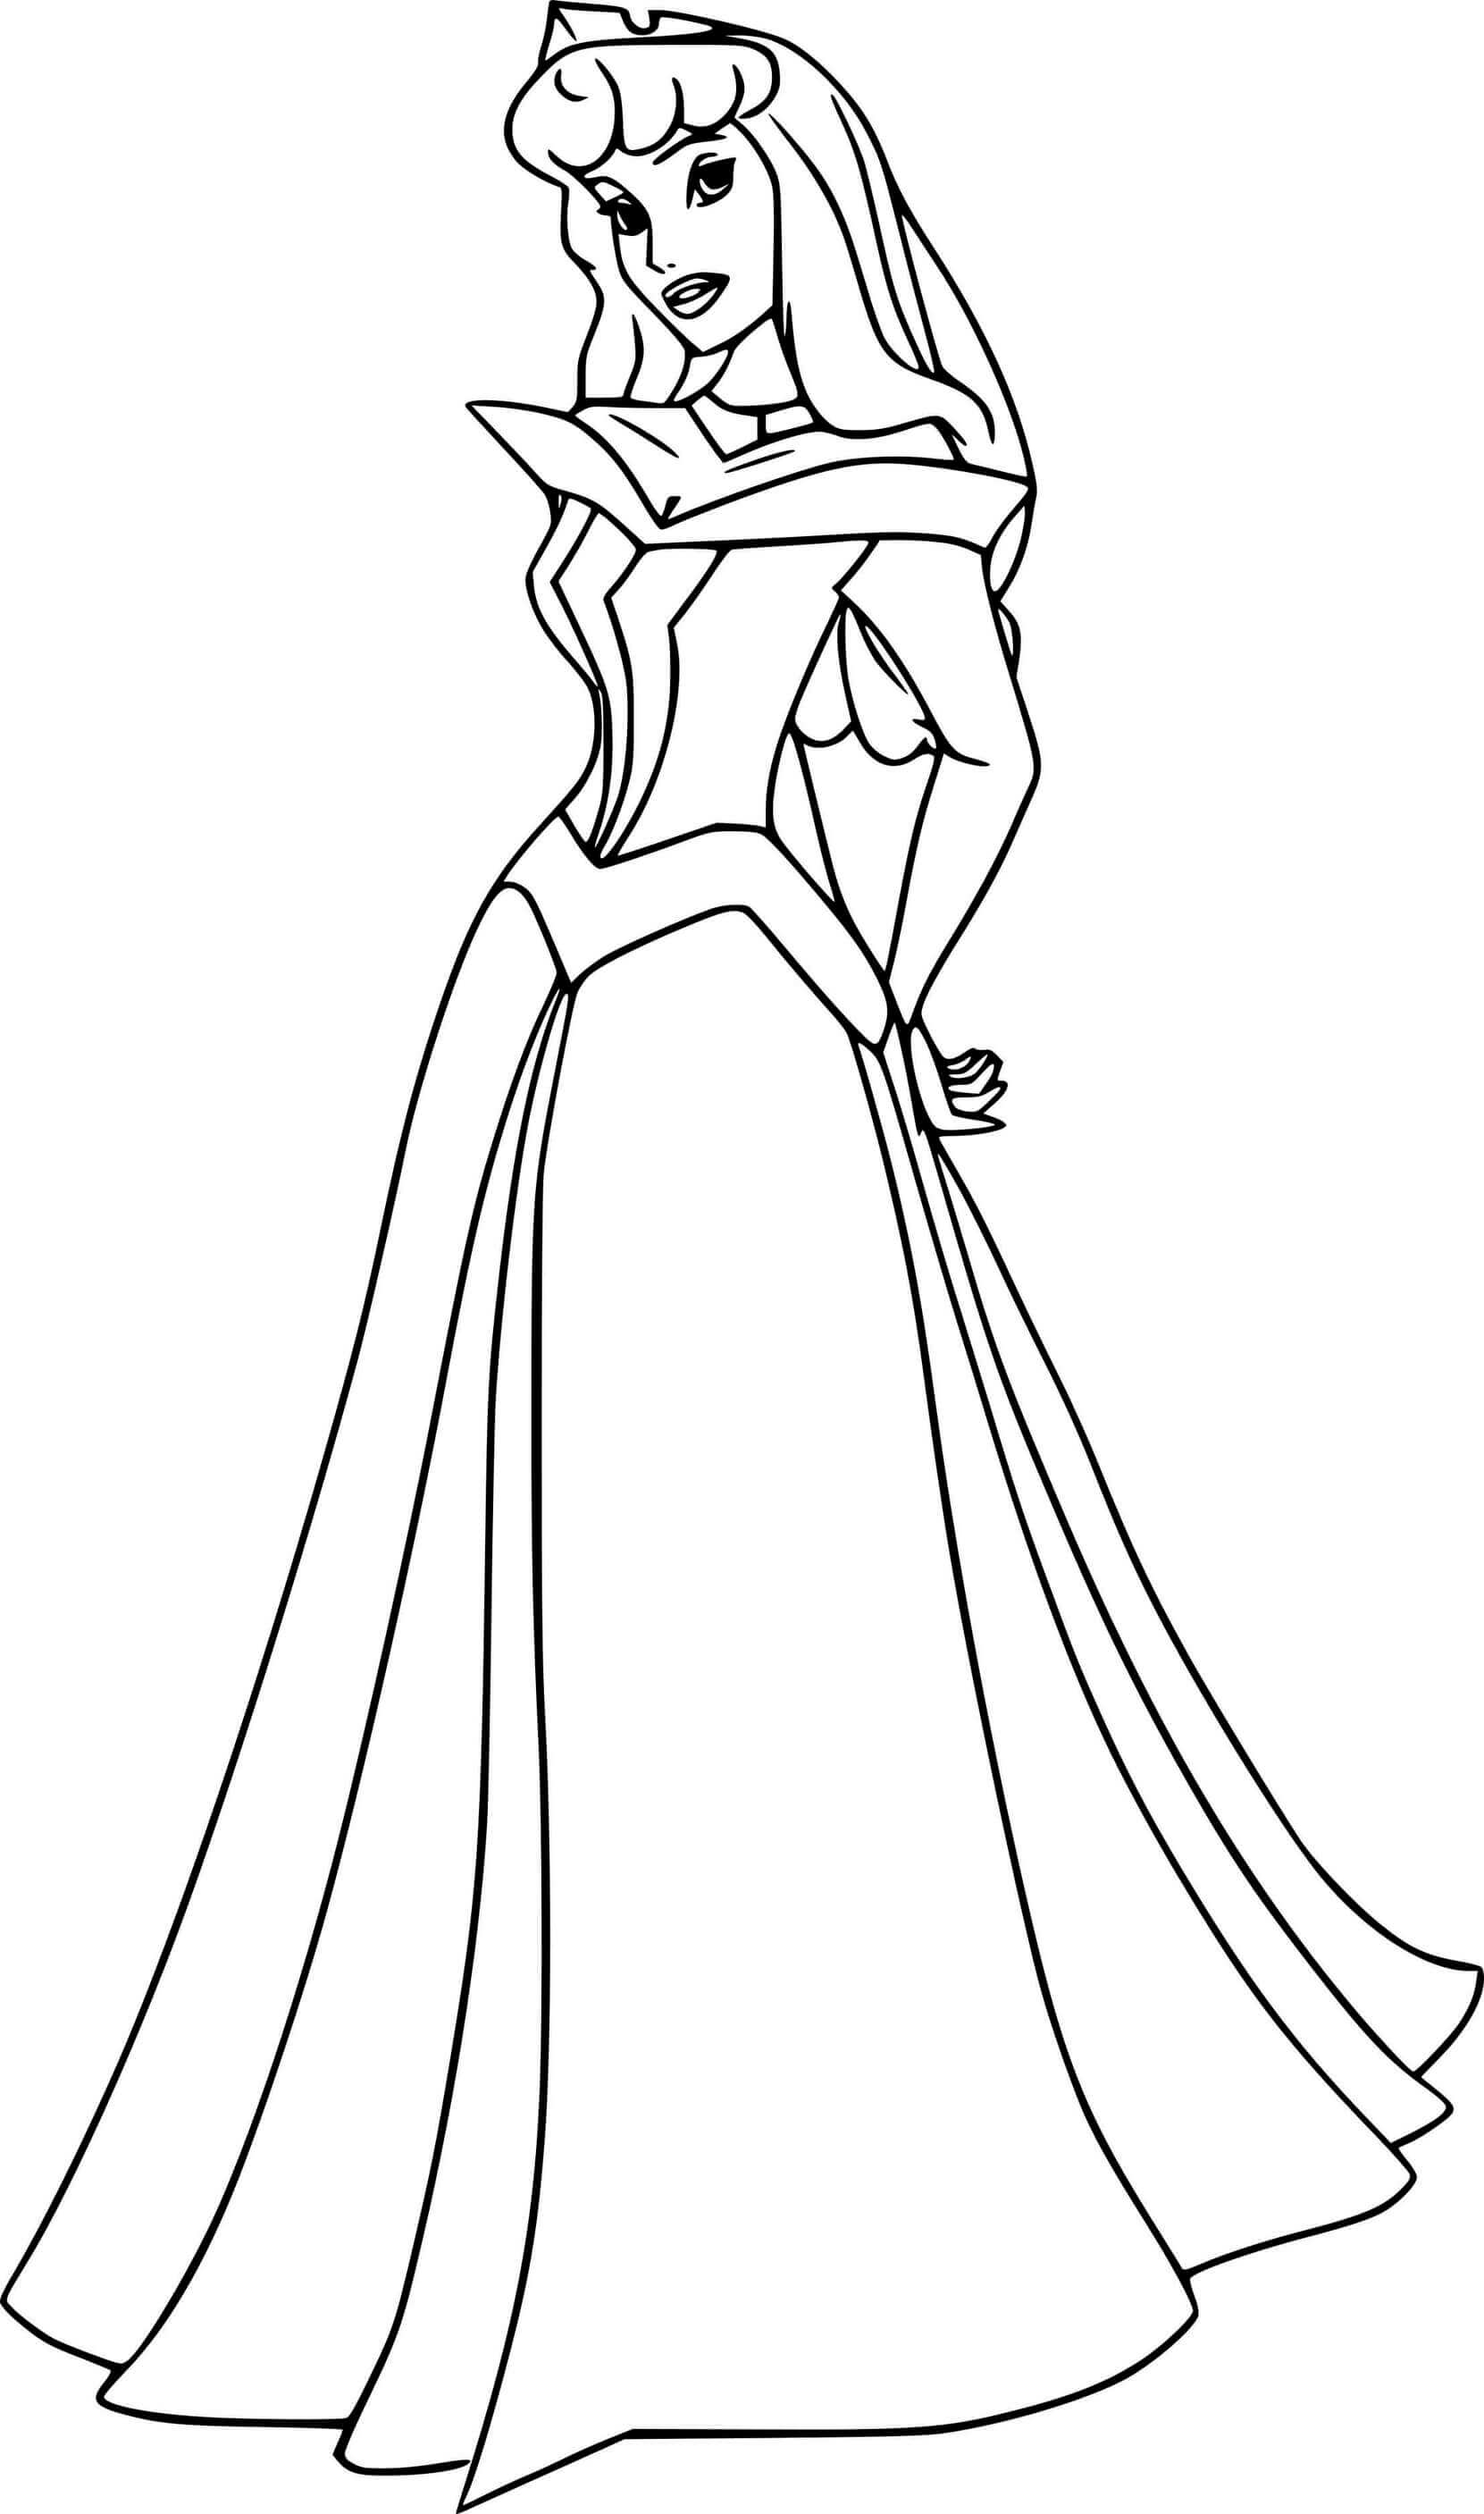 Gorgeous Aurora Coloring Pages   Coloring Cool